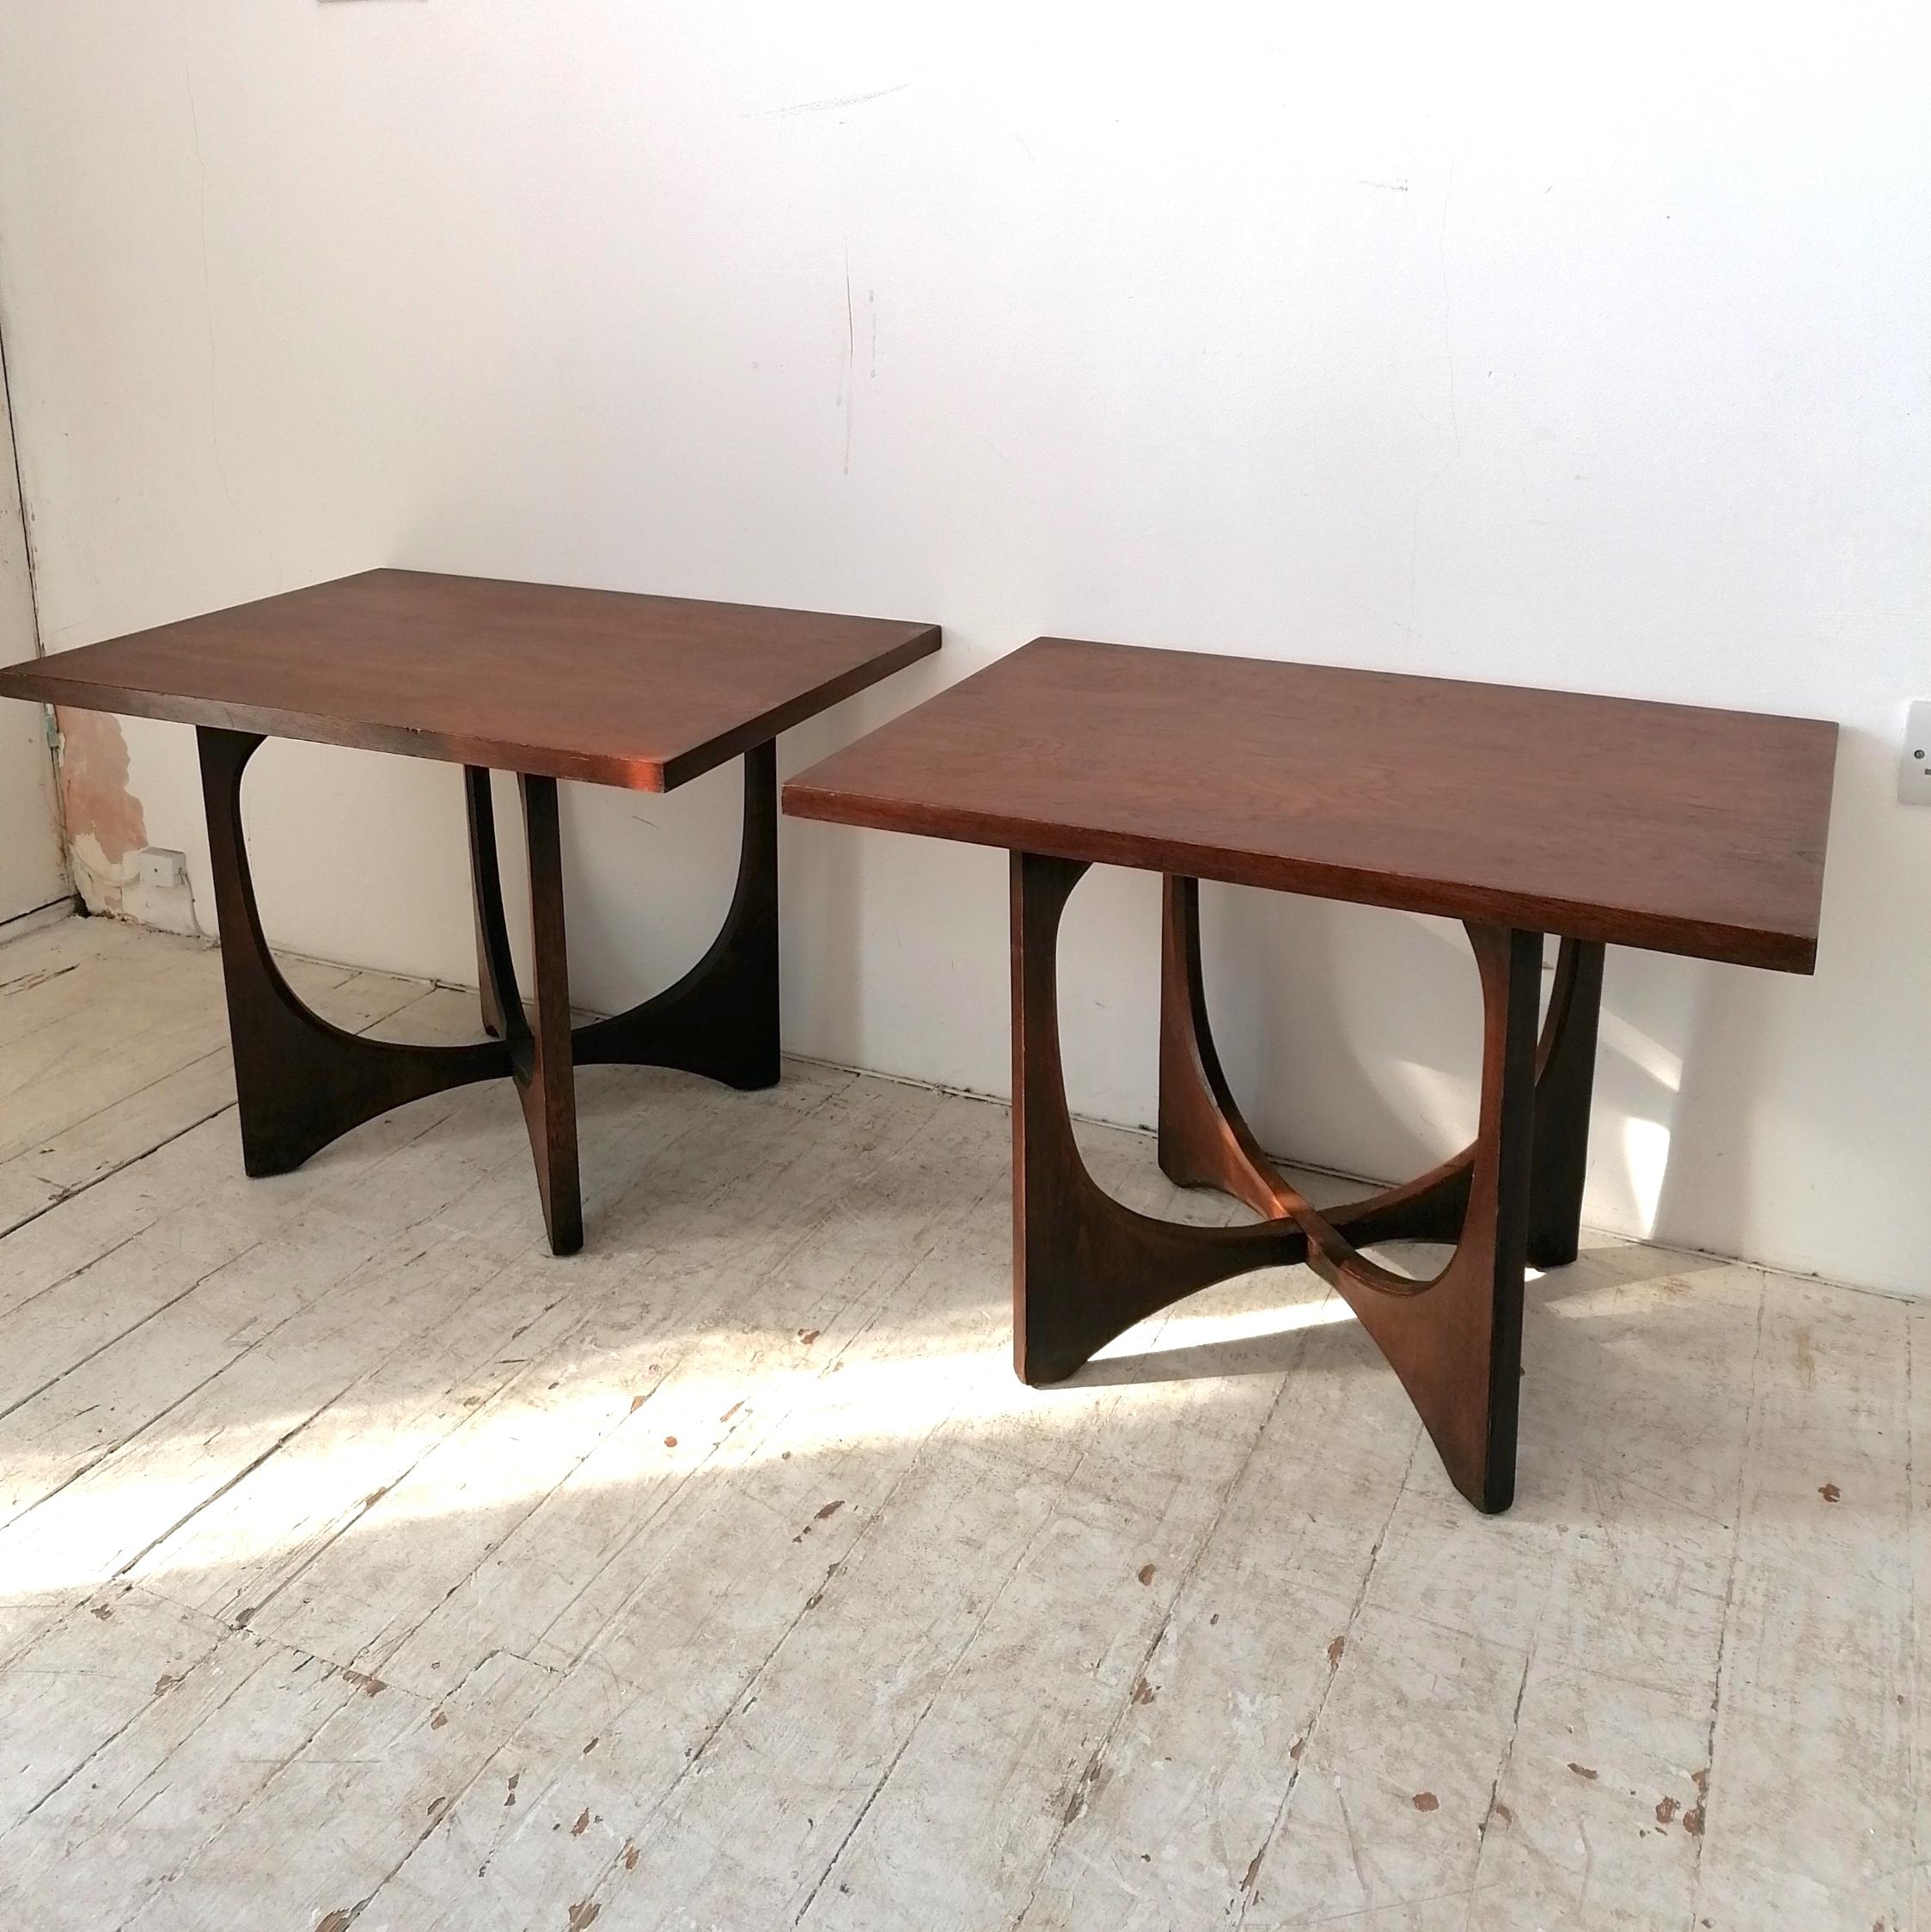 A pair of classic midcentury Broyhill 'Brasilia' walnut side tables, USA 1960s. In good vintage condition, ie a slight amount of wear, commensurate with age.

The Brasilia range was inspired by the architecture of the city of Brasilia by 1950s